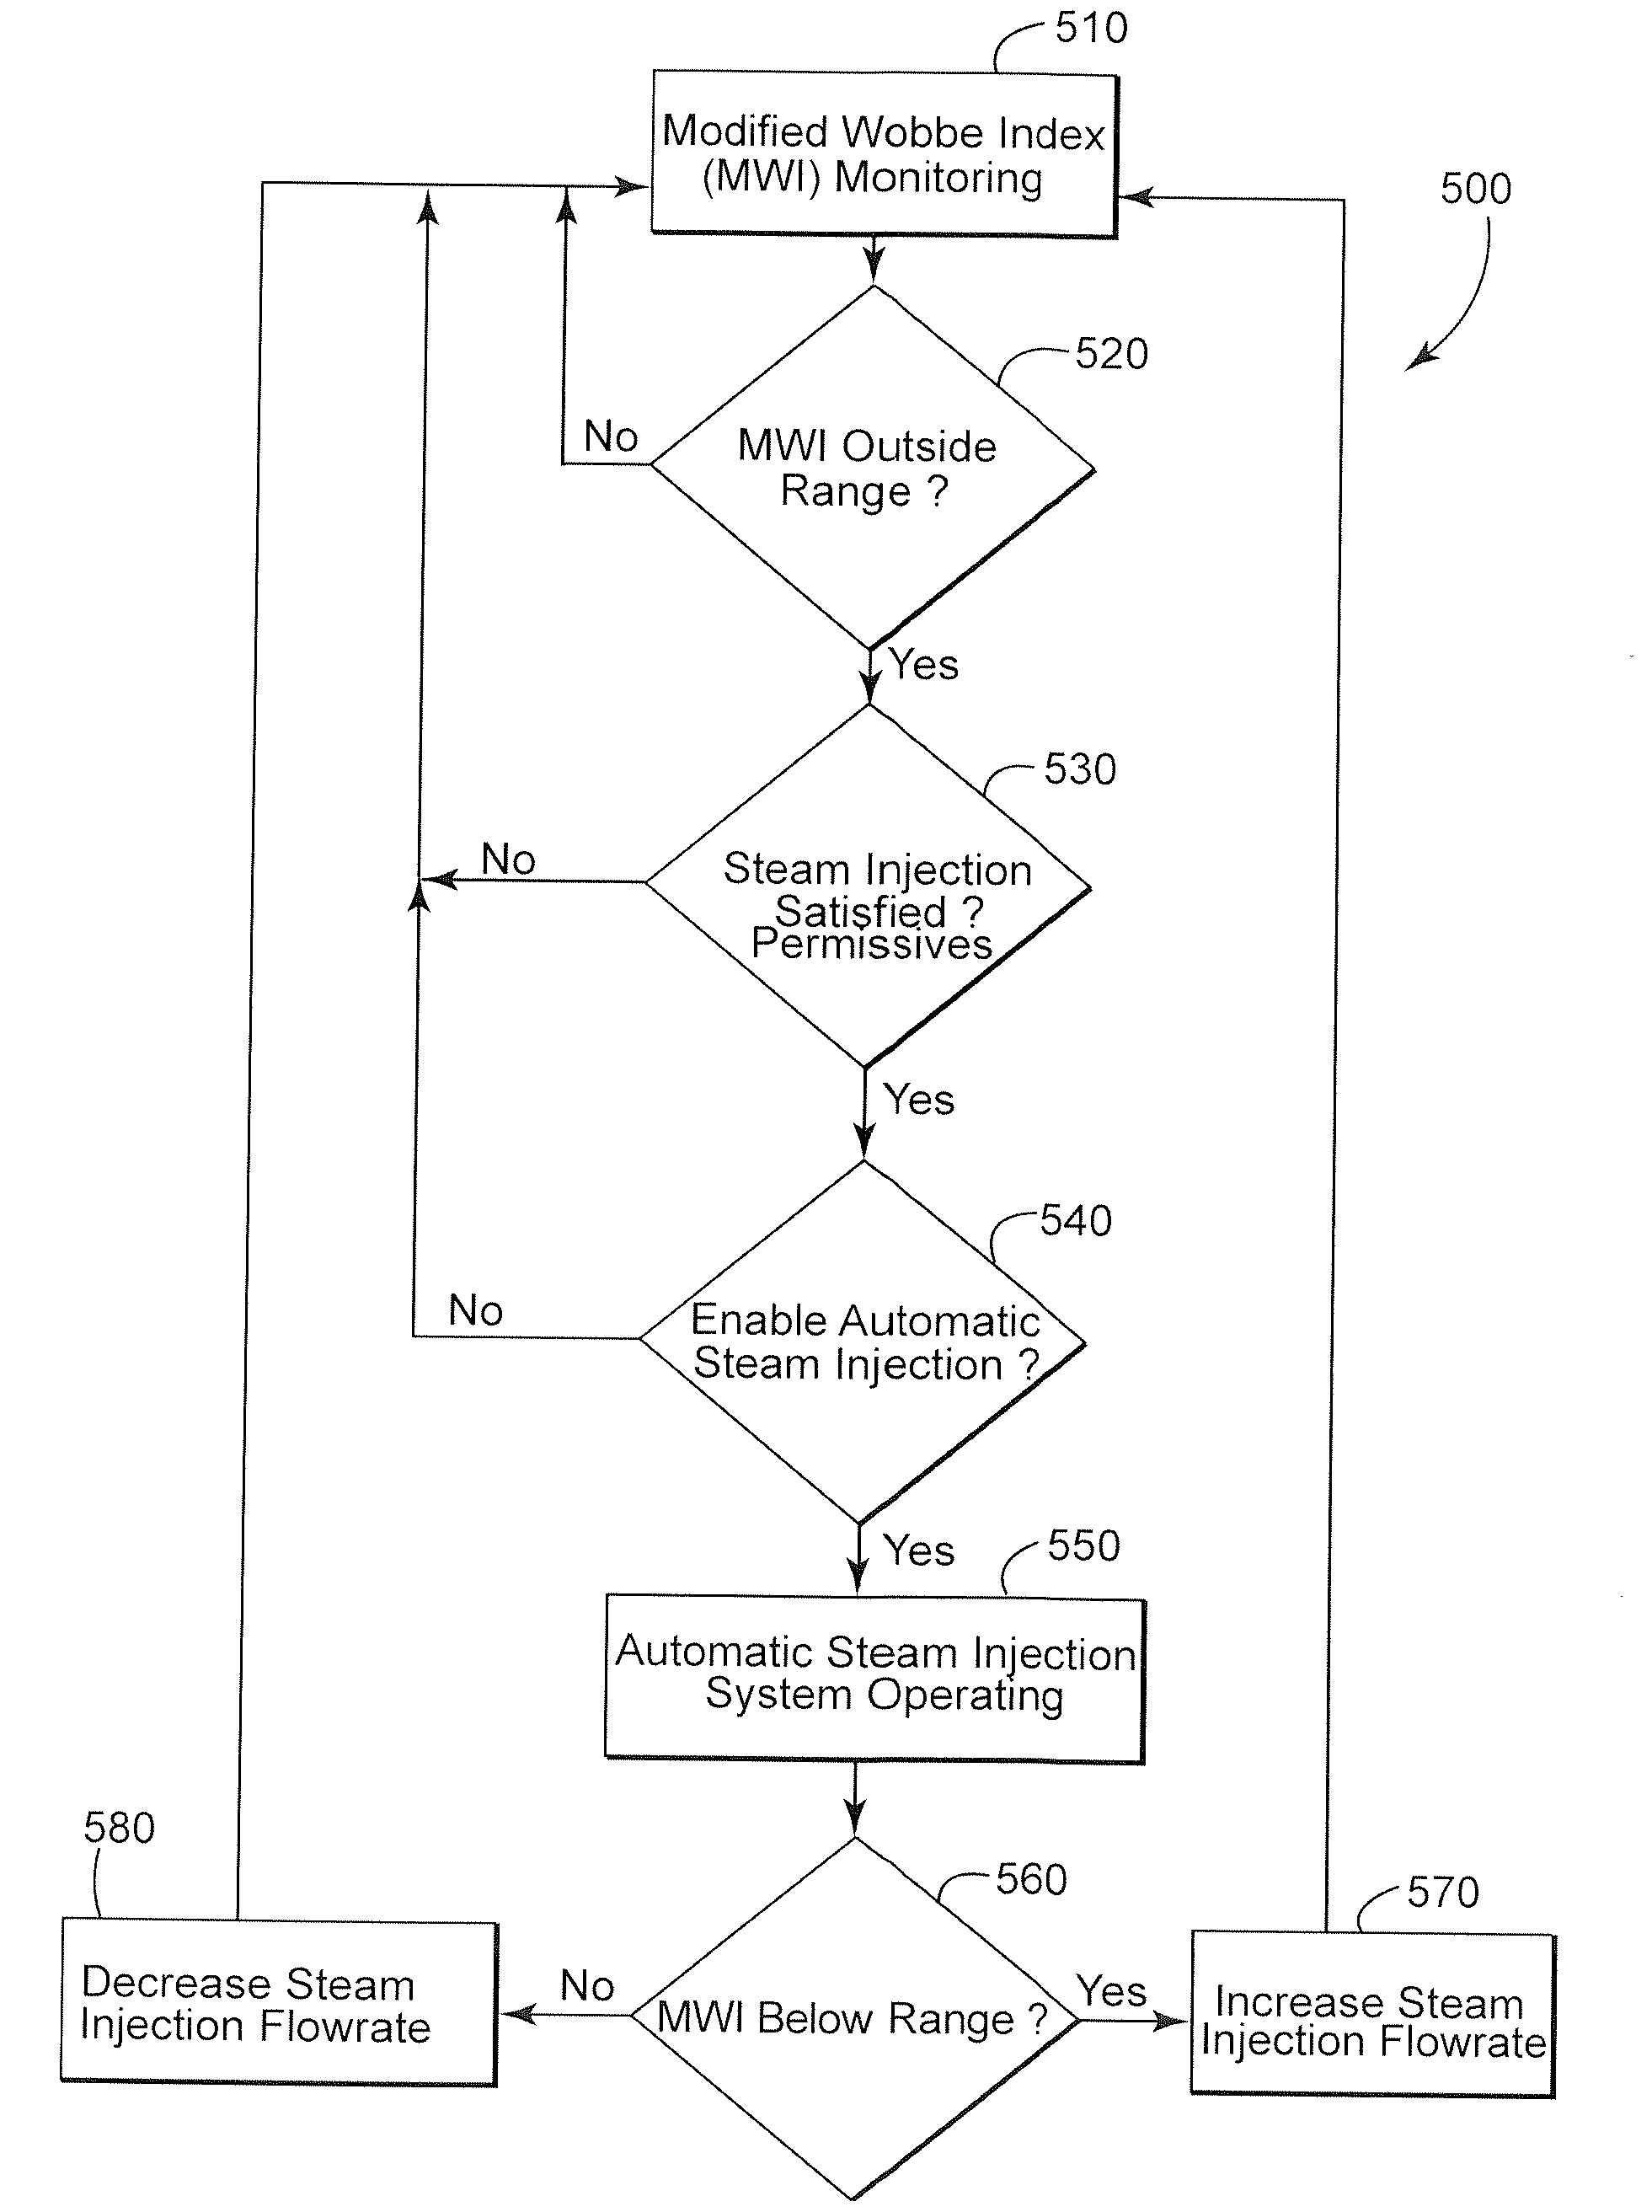 Method and system for modulating the modified wobbe index of a fuel